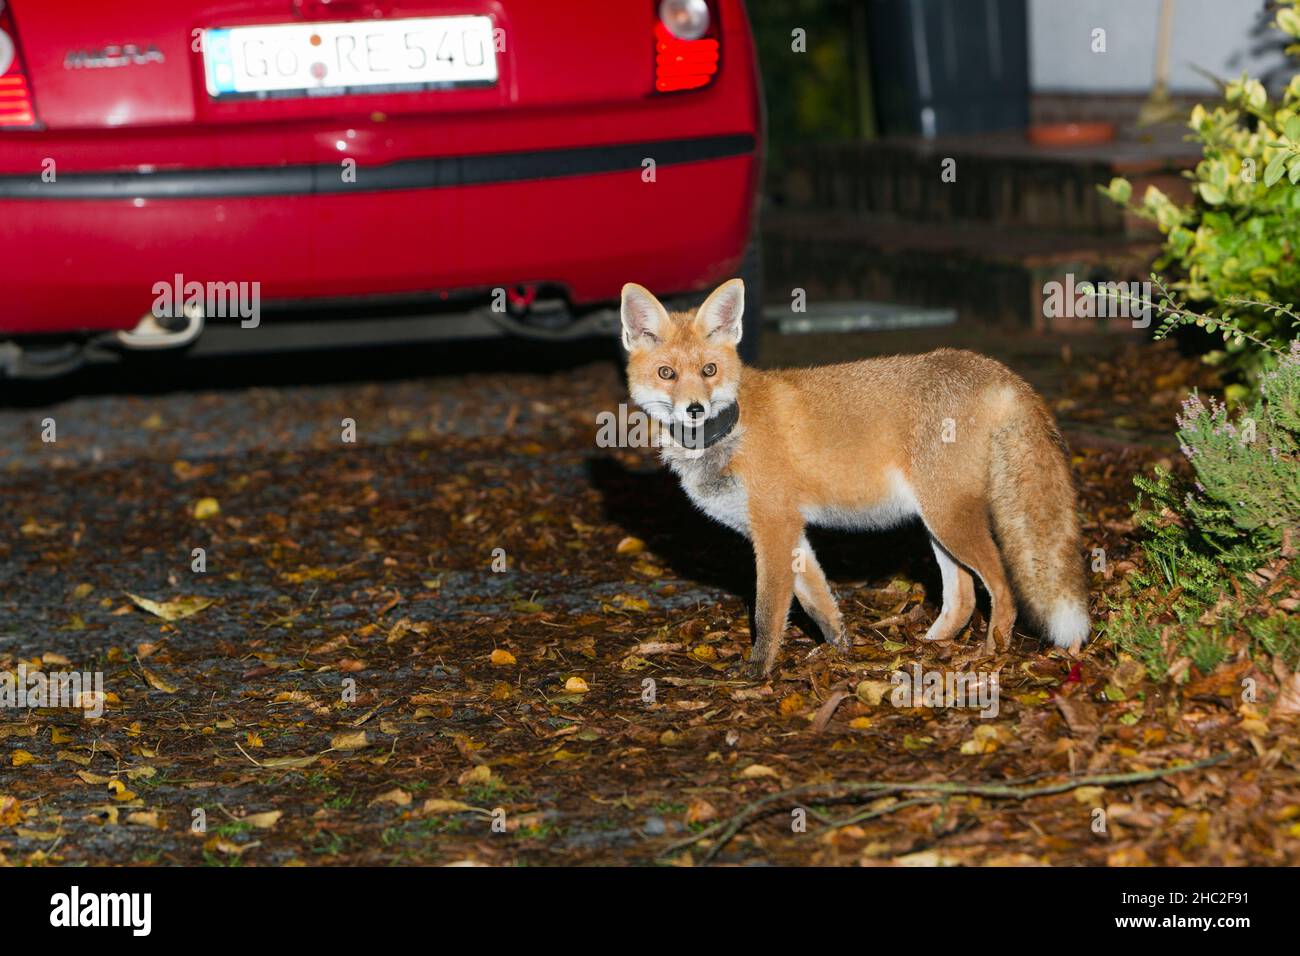 European Red Fox, (Vulpus vulpus), with plant pot around neck, standing on driveway of house premises, at night, Lower Saxony, Germany Stock Photo